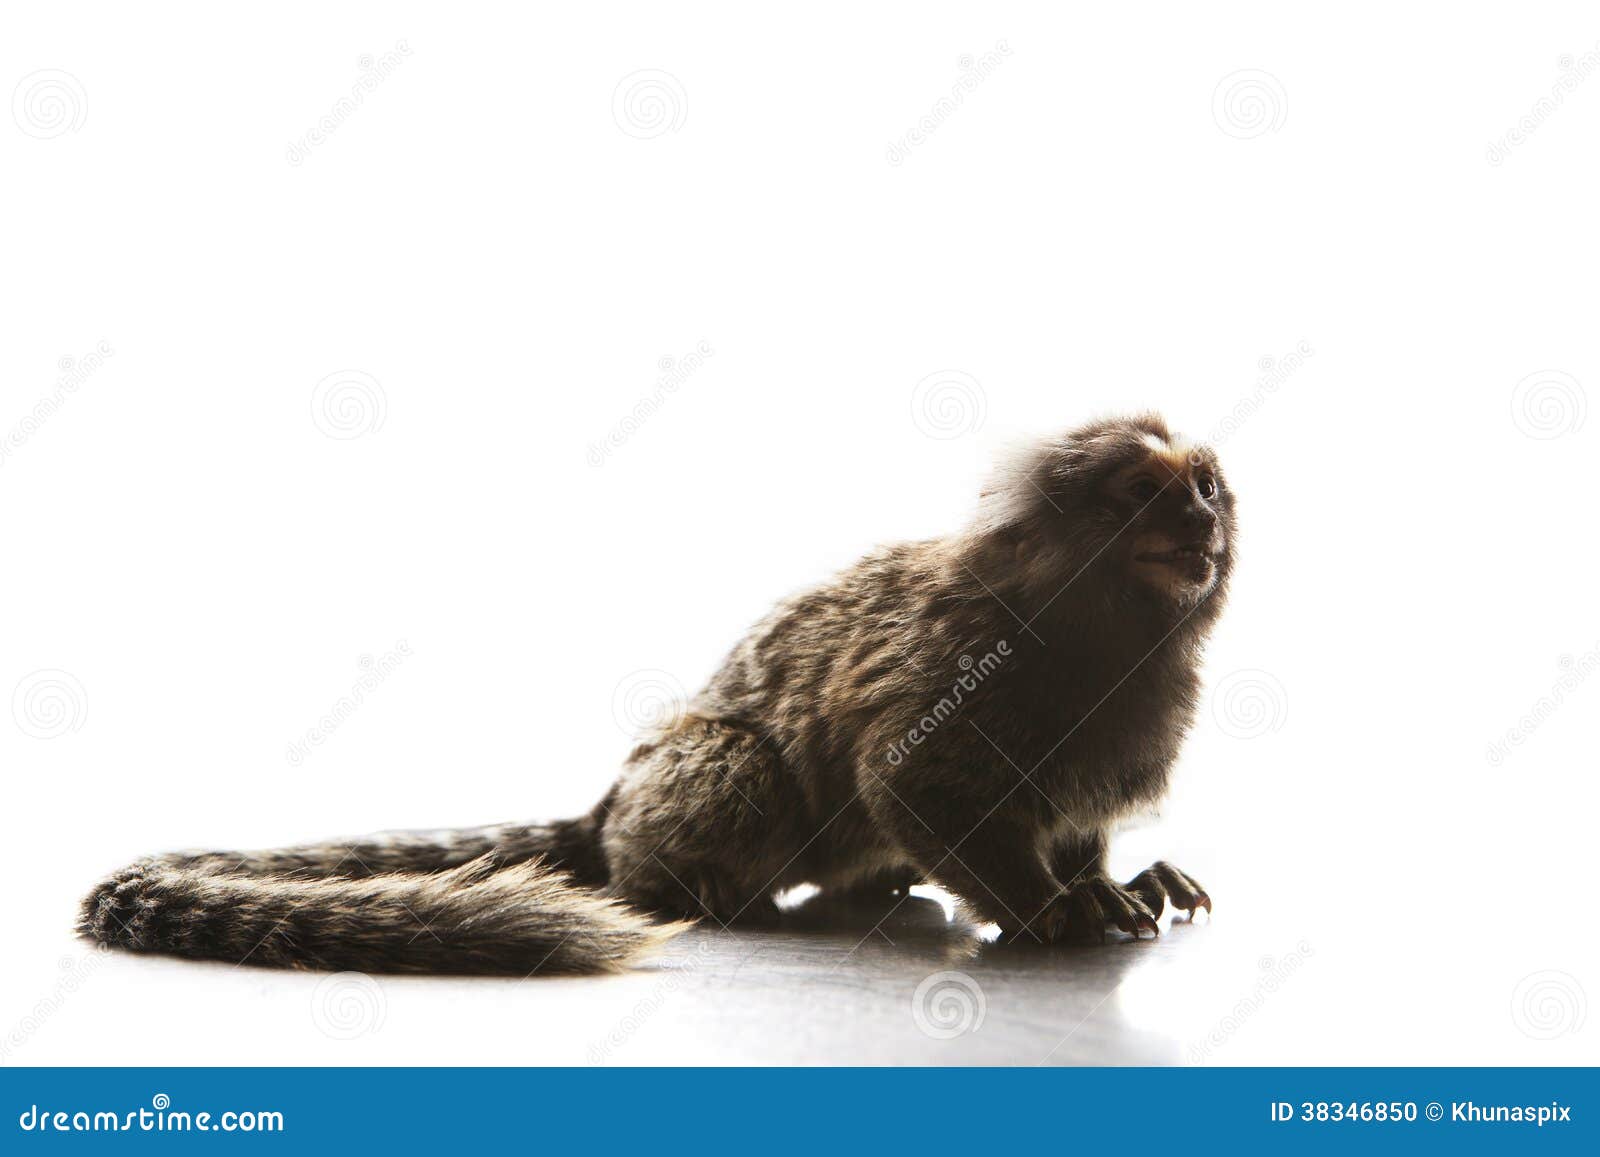 full body and tail of marmoset callithricidae smallest monkey w